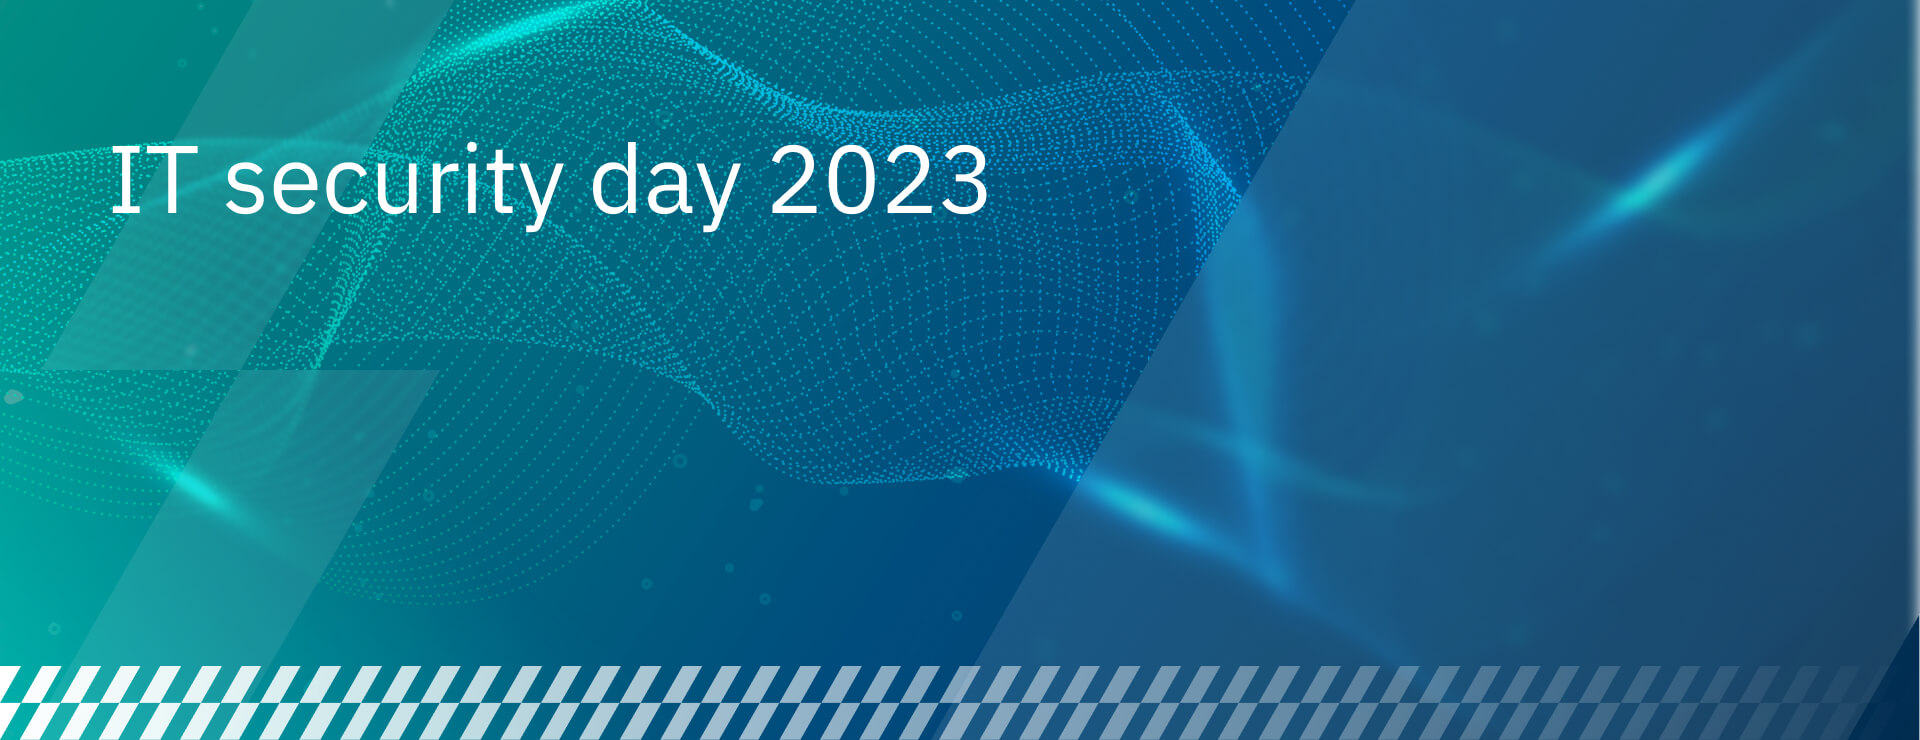 IT Security Day 2023